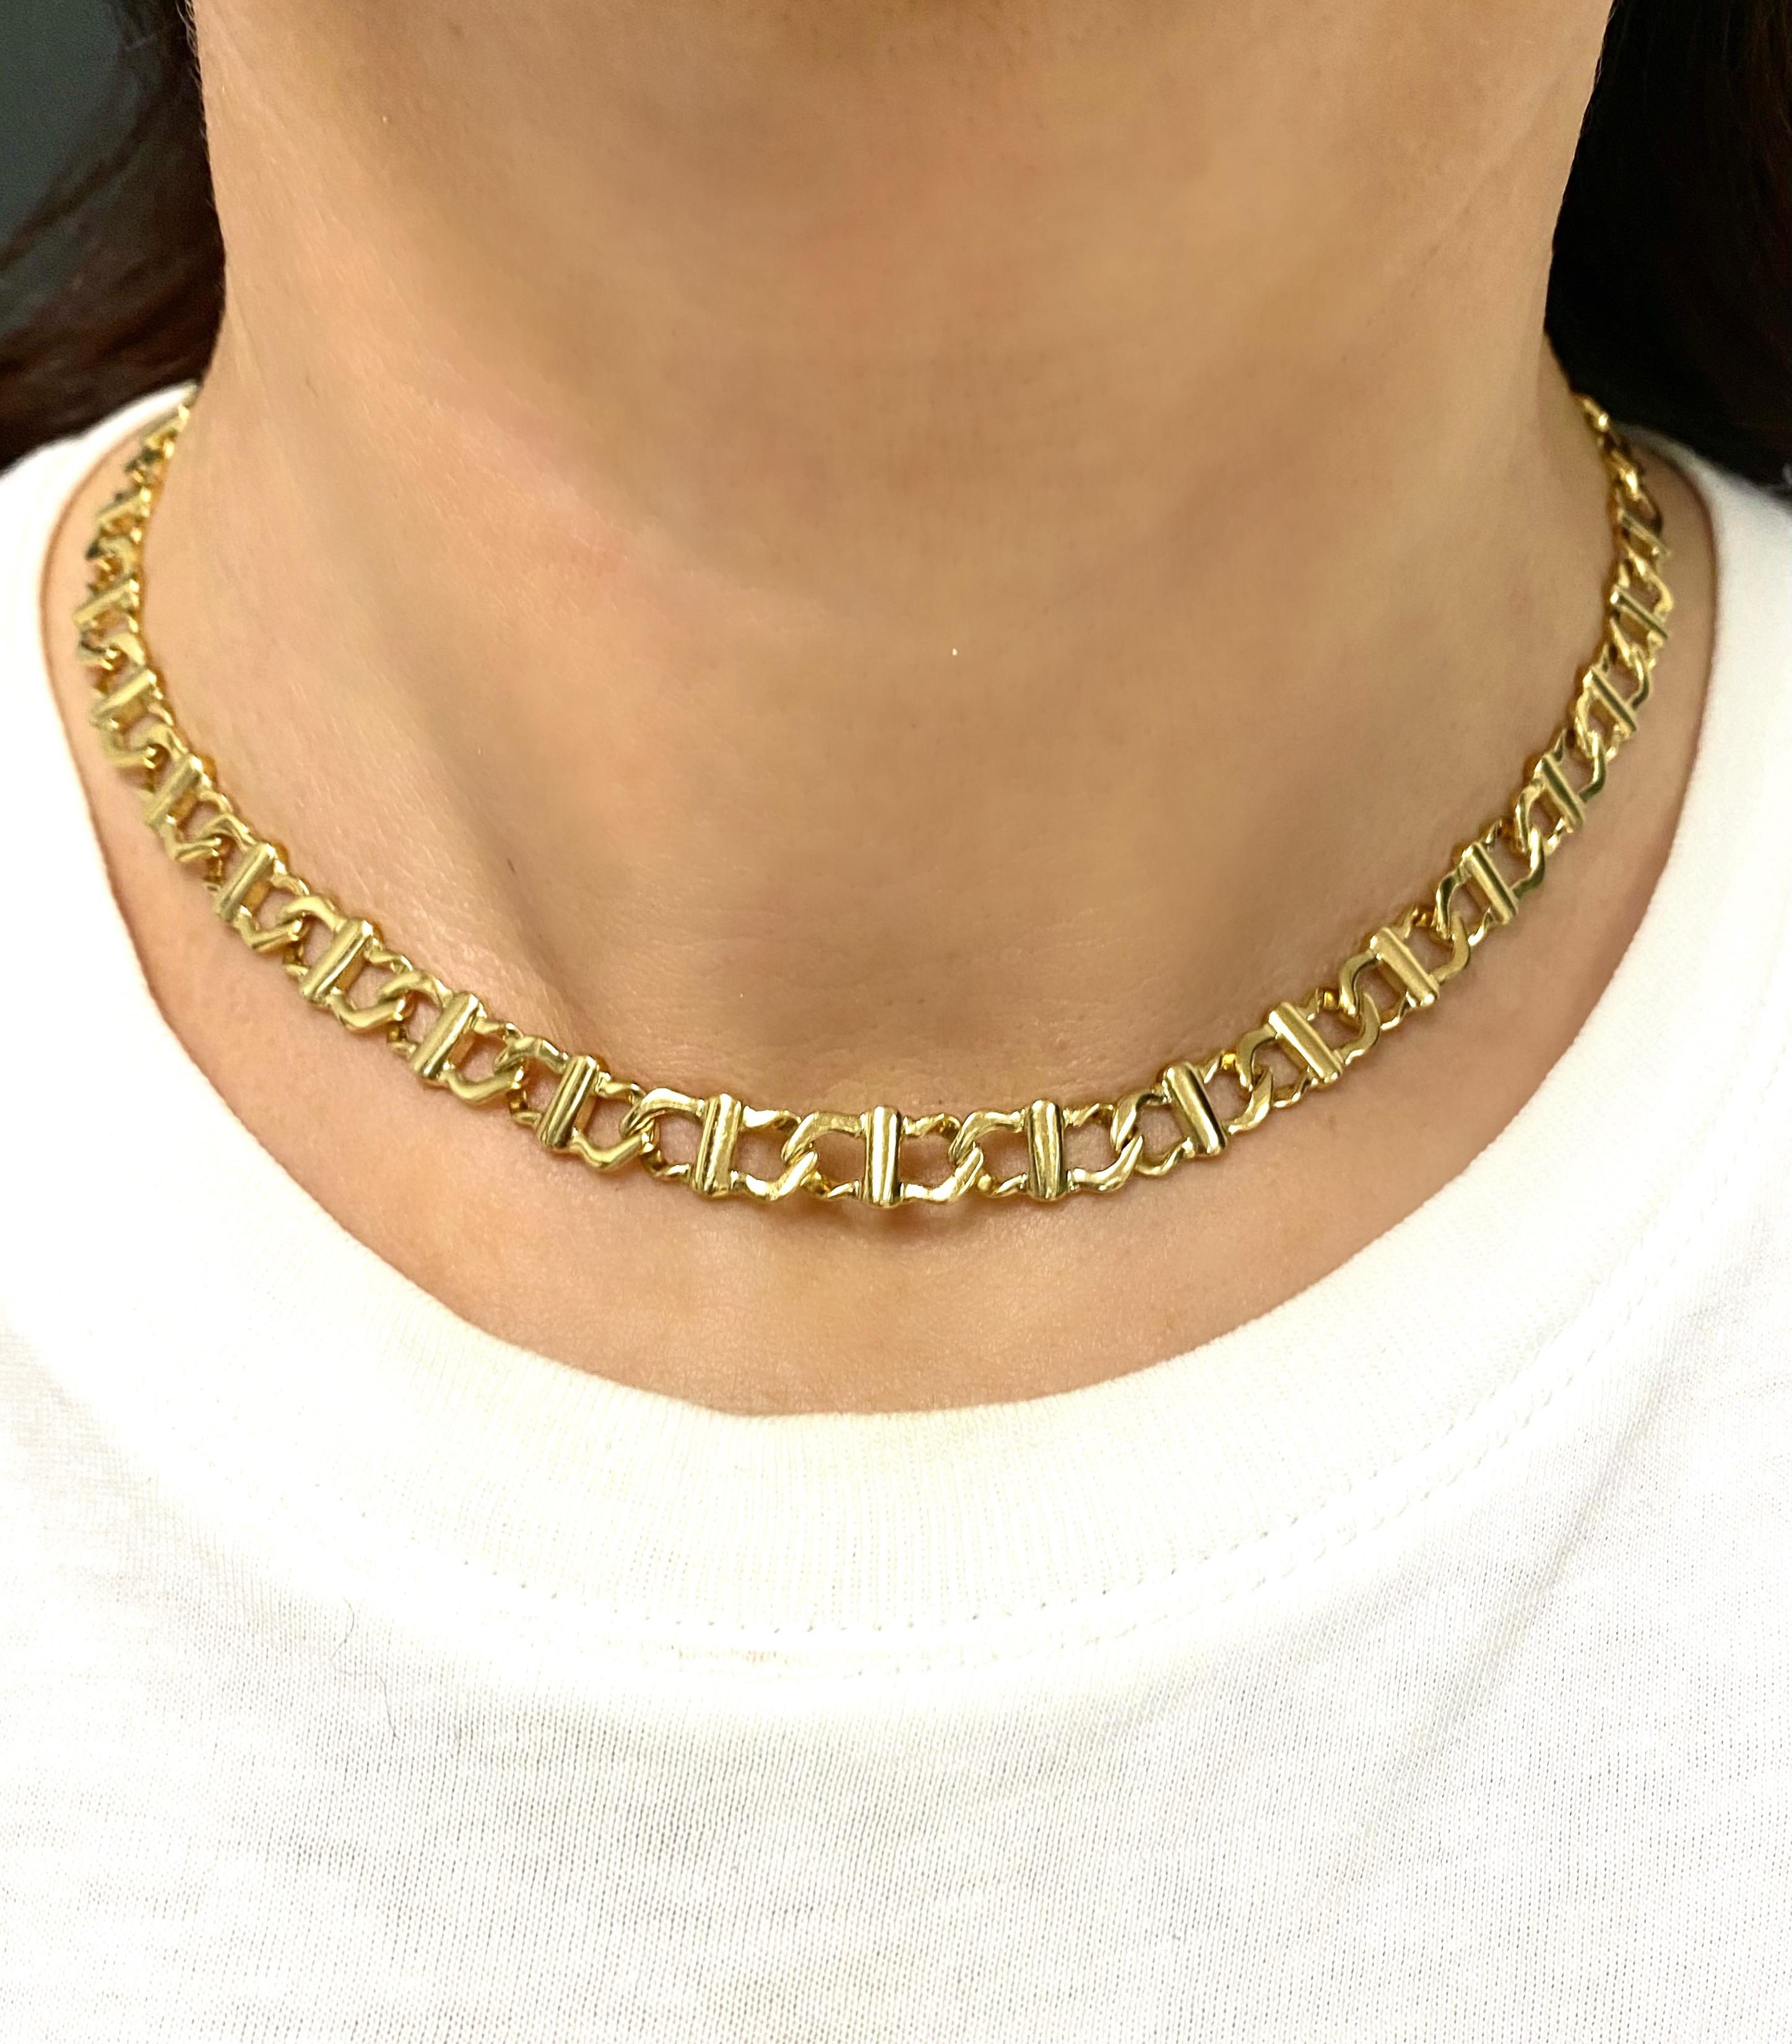 An excellent Cartier yellow gold chain necklace that was made in the late 1980s.

​The unusual link is assembled of two interlocked C-shape parts connected by the vertical bars.

​It’s a rare necklace by Cartier that you won’t be taking off too